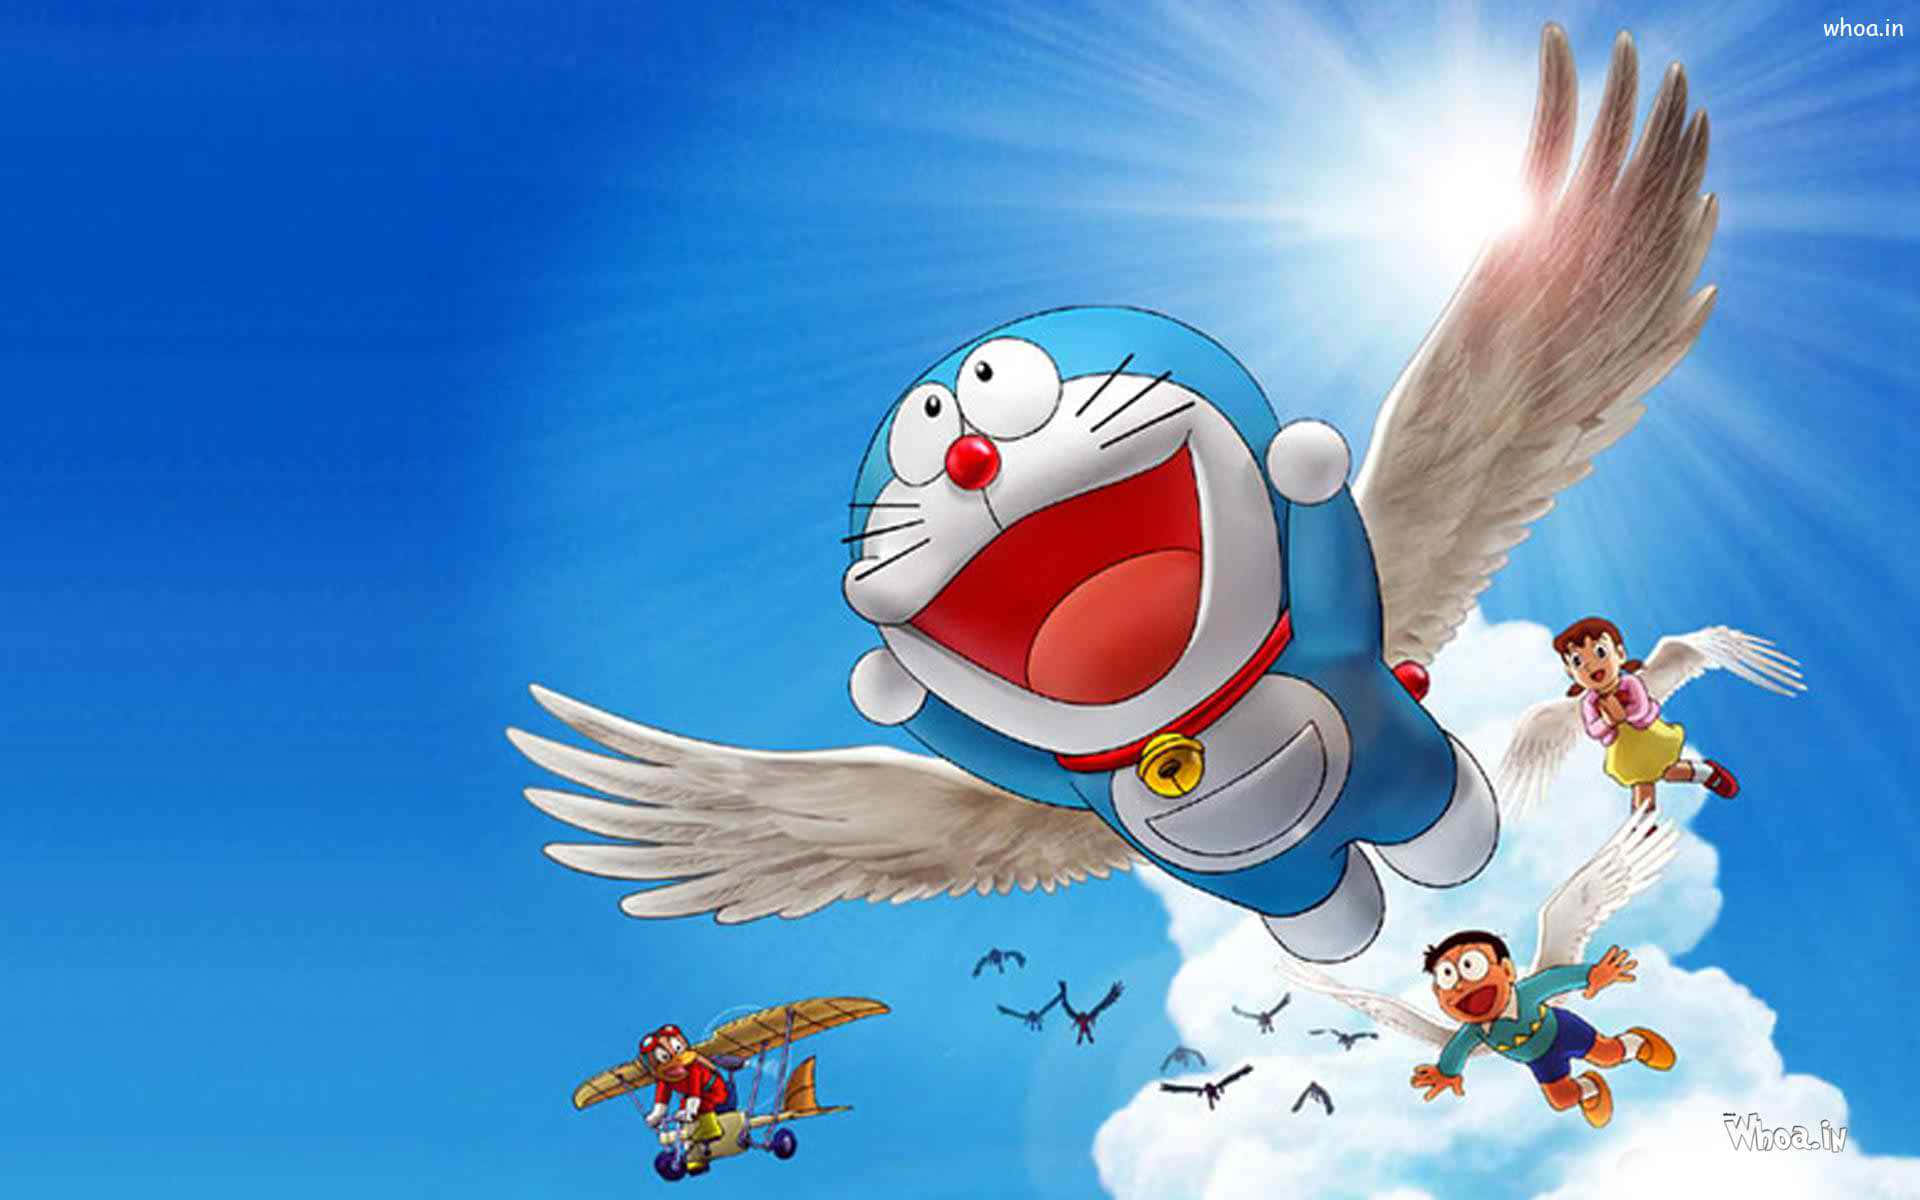 Stand By Me, Doraemon!